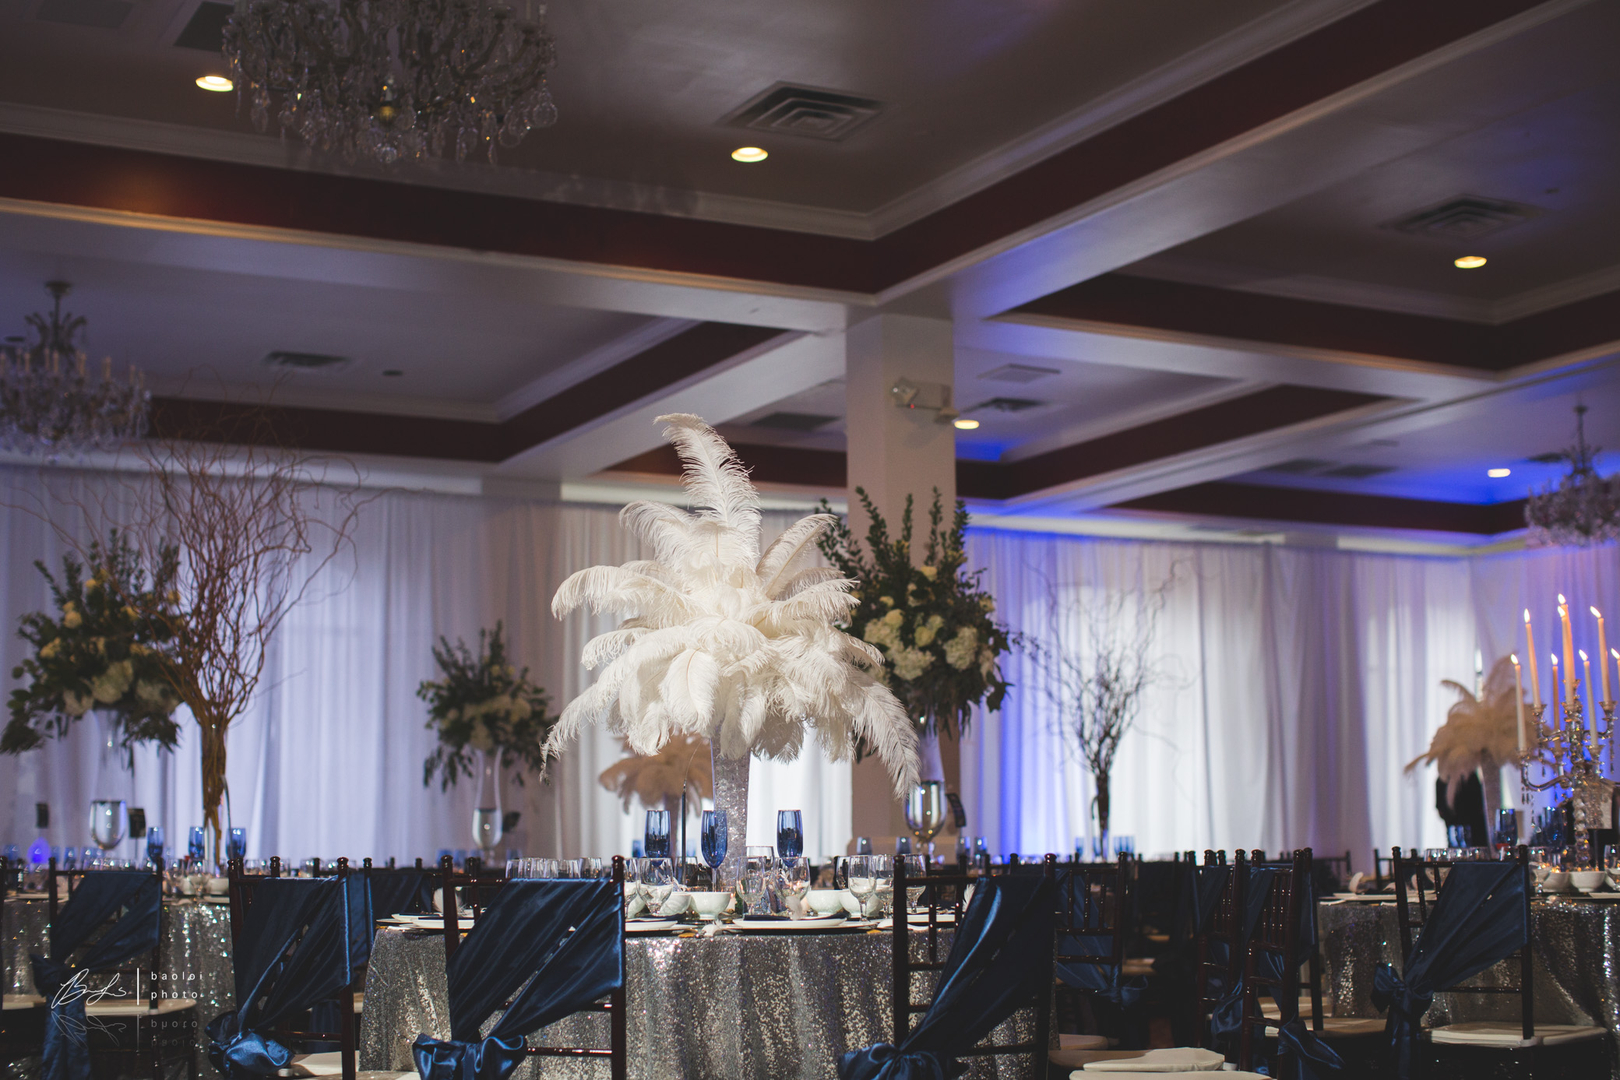 Linen Rental Houston For Event And Wedding Decorations